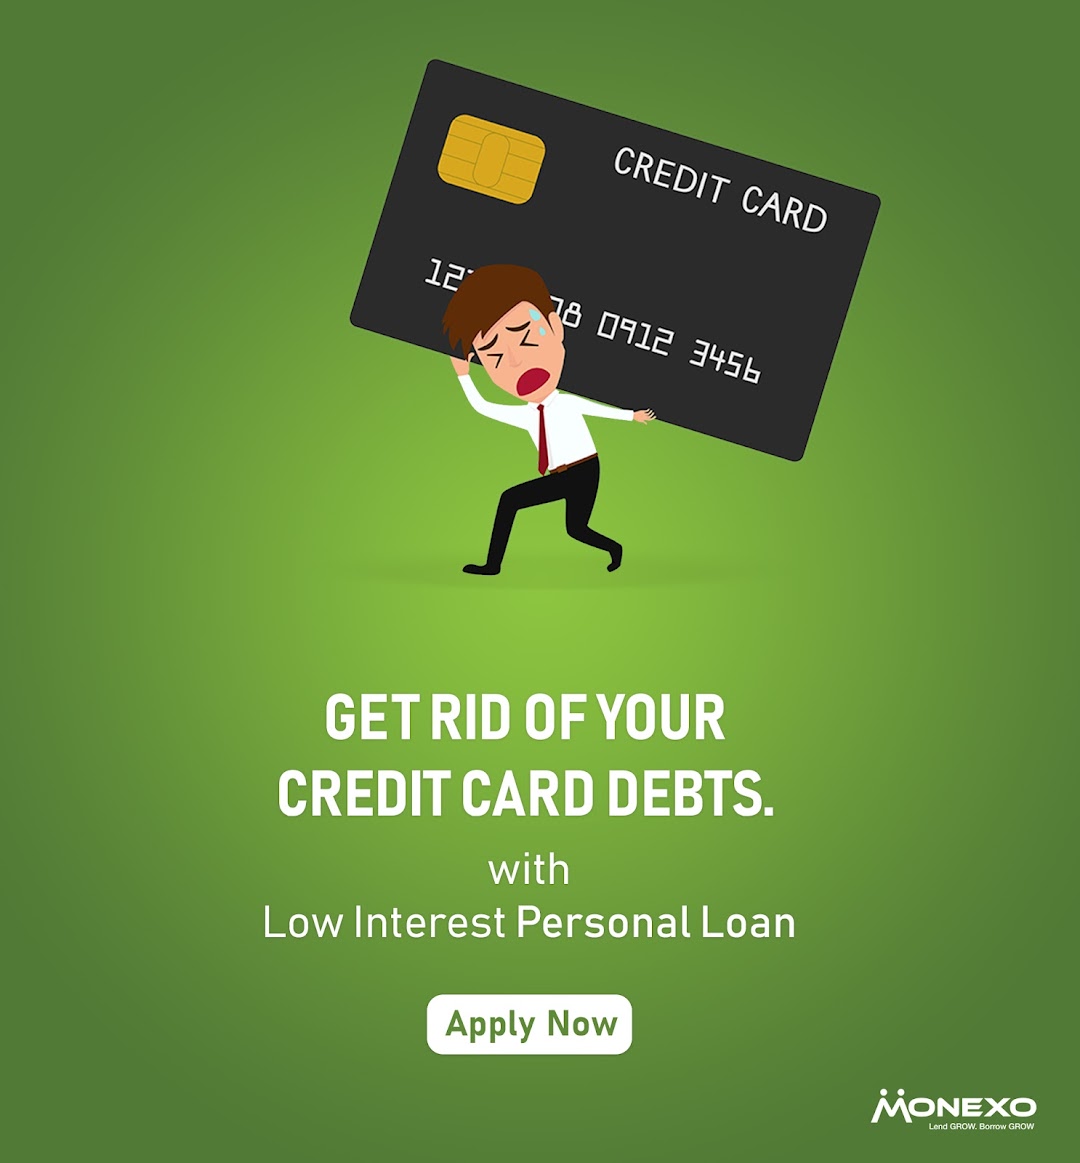 Monexo - Apply for Personal Loan | P2P Lending in India